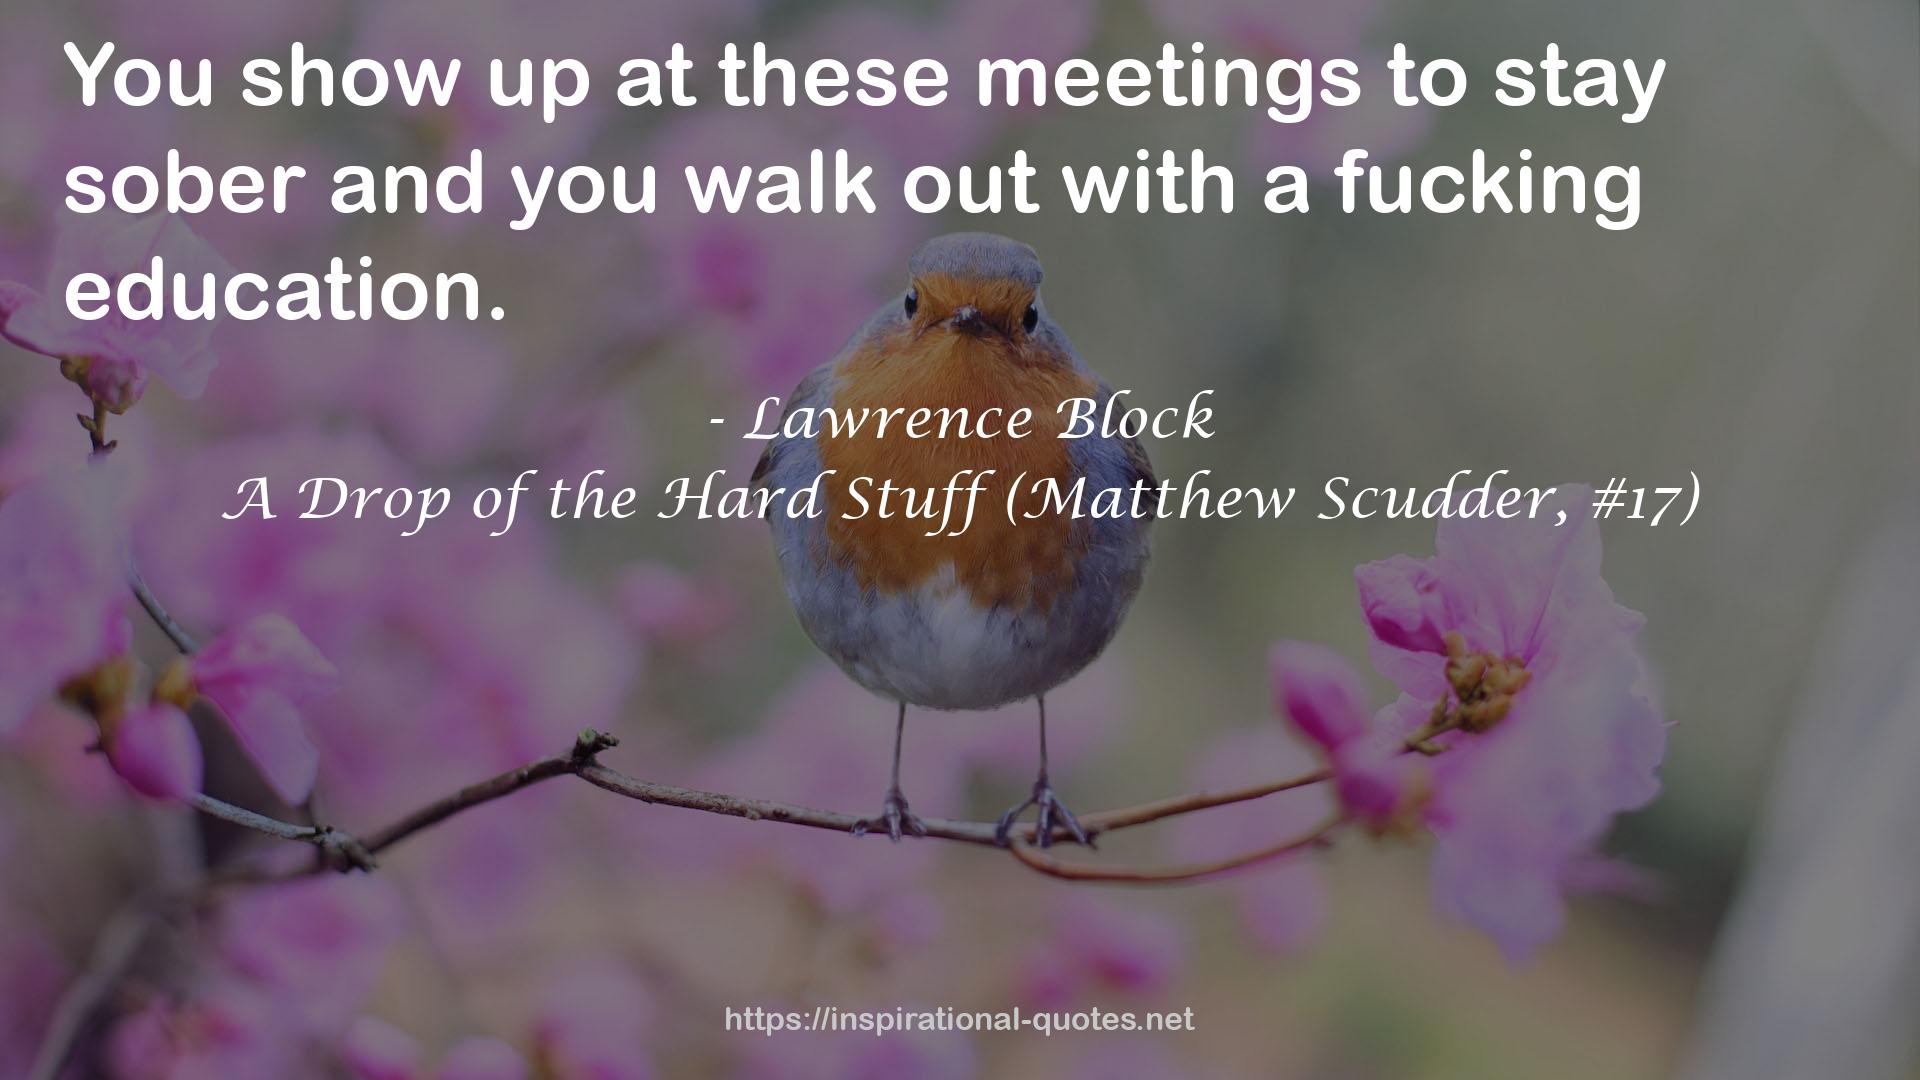 A Drop of the Hard Stuff (Matthew Scudder, #17) QUOTES